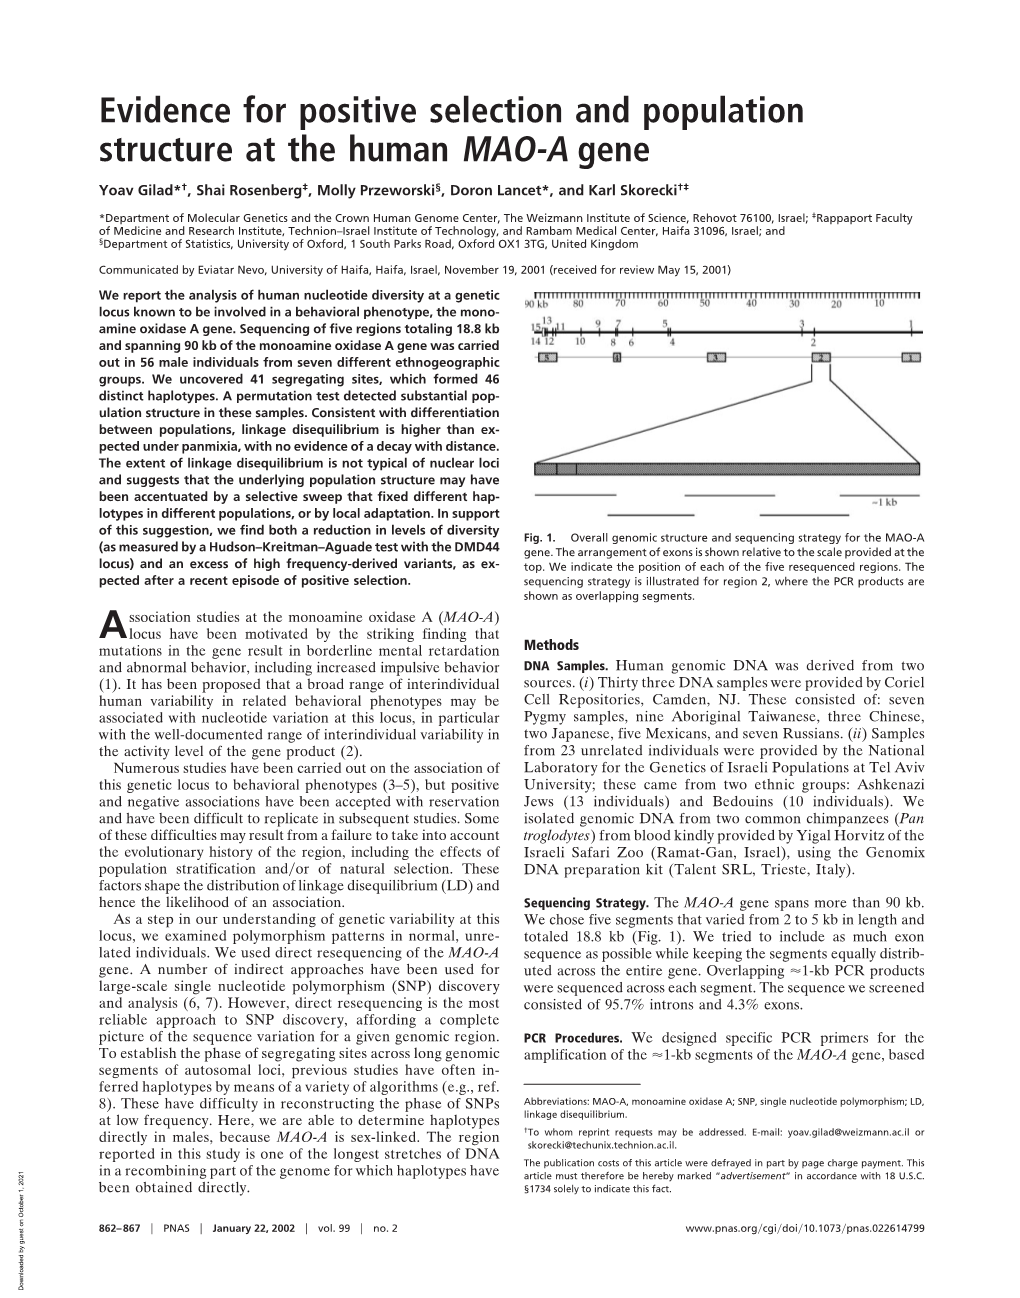 Evidence for Positive Selection and Population Structure at the Human MAO-A Gene